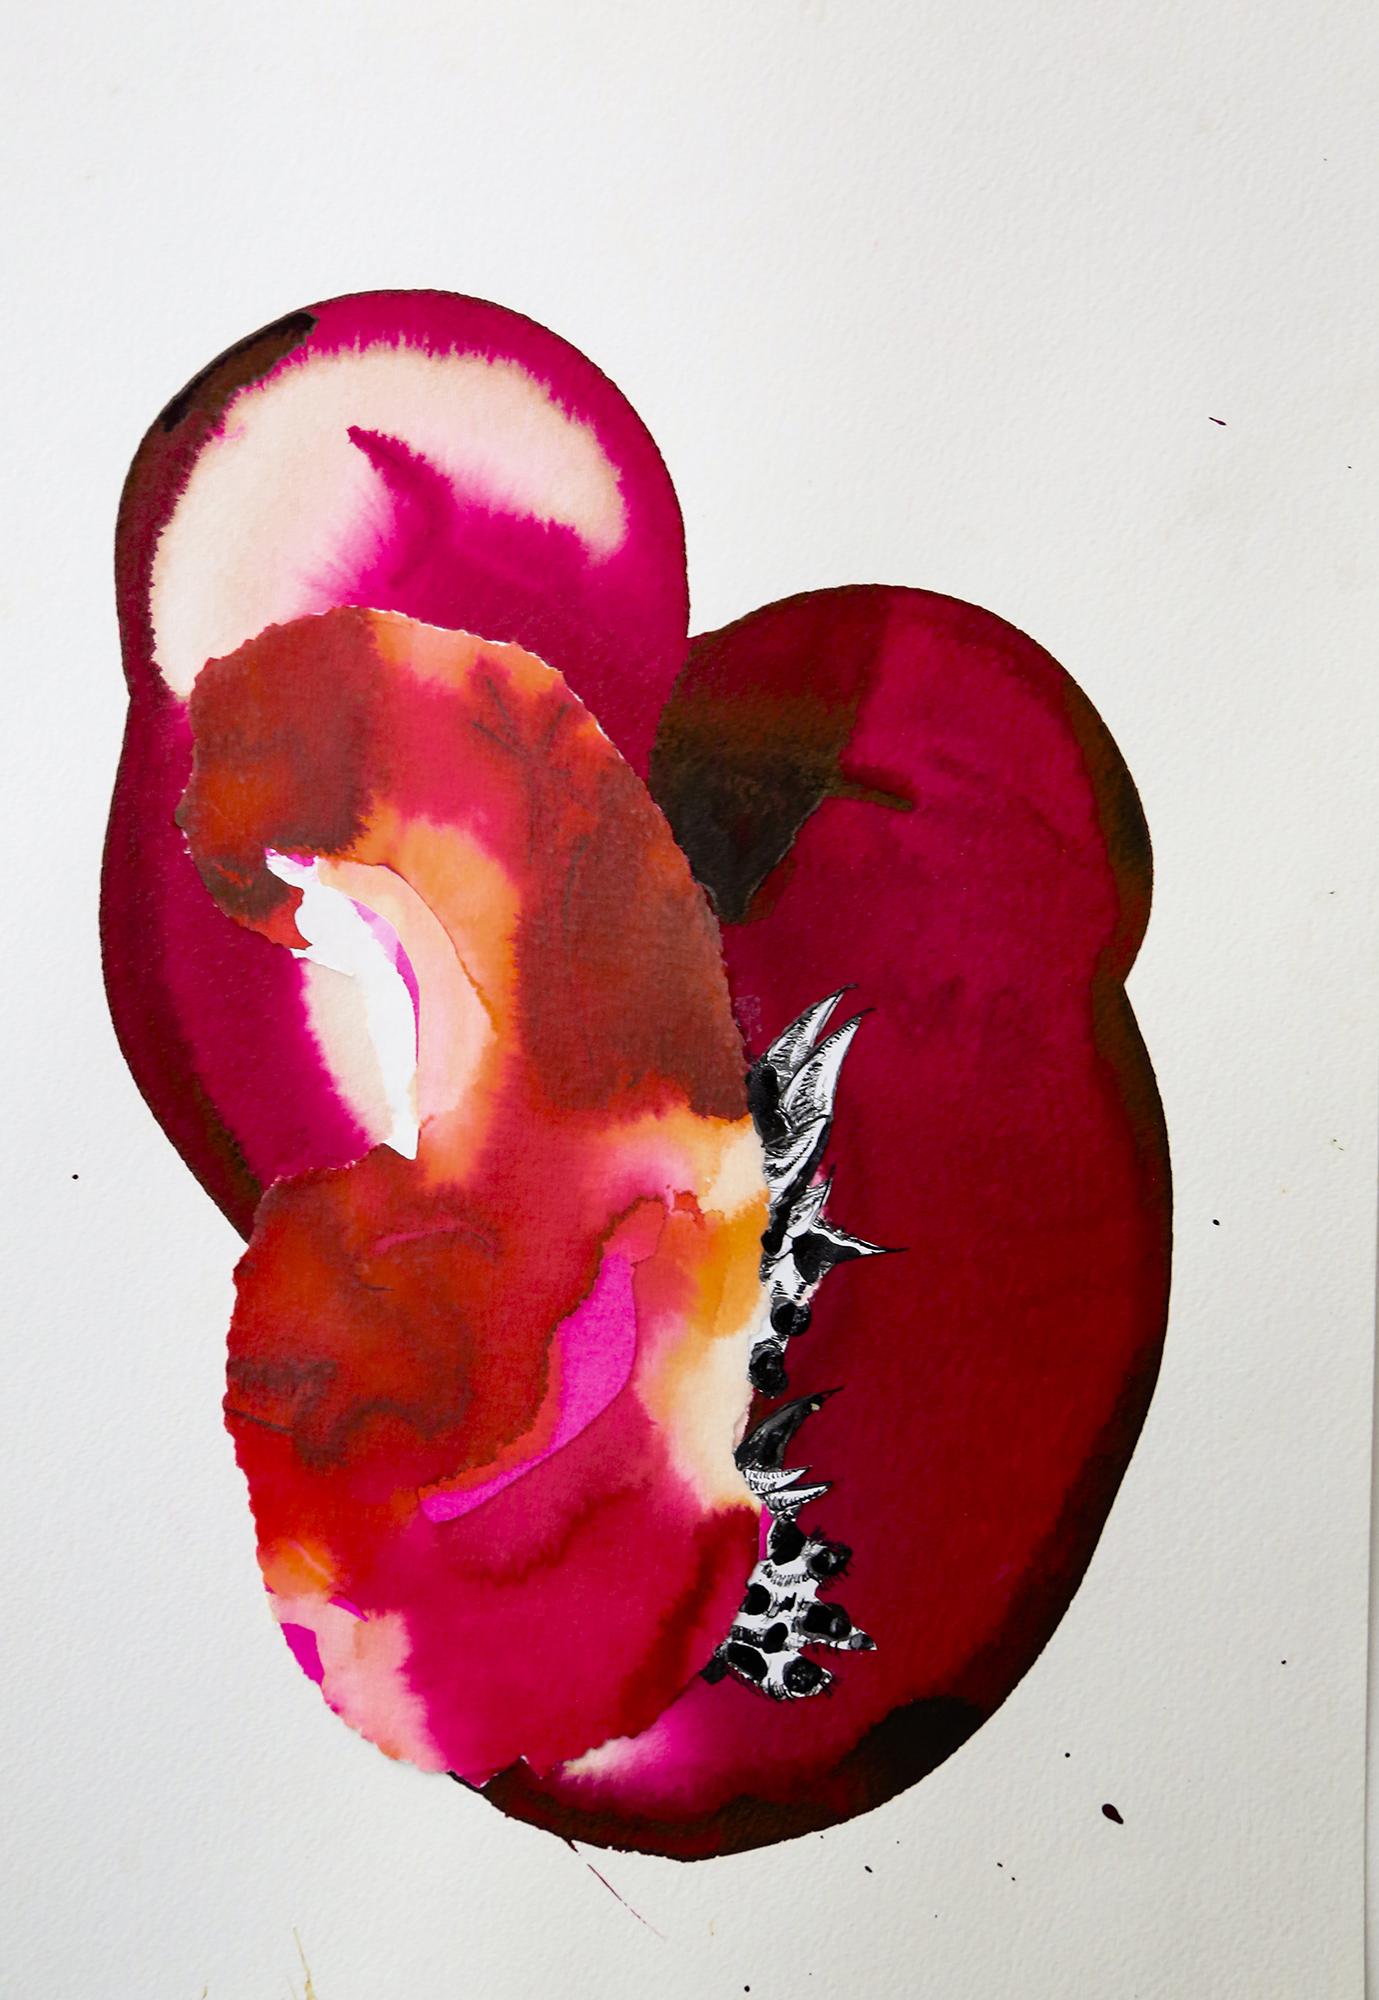 P.X. Désirée, abstract watercolor, ink on paper, red flowers inspiration - Art by Laurence Le Constant